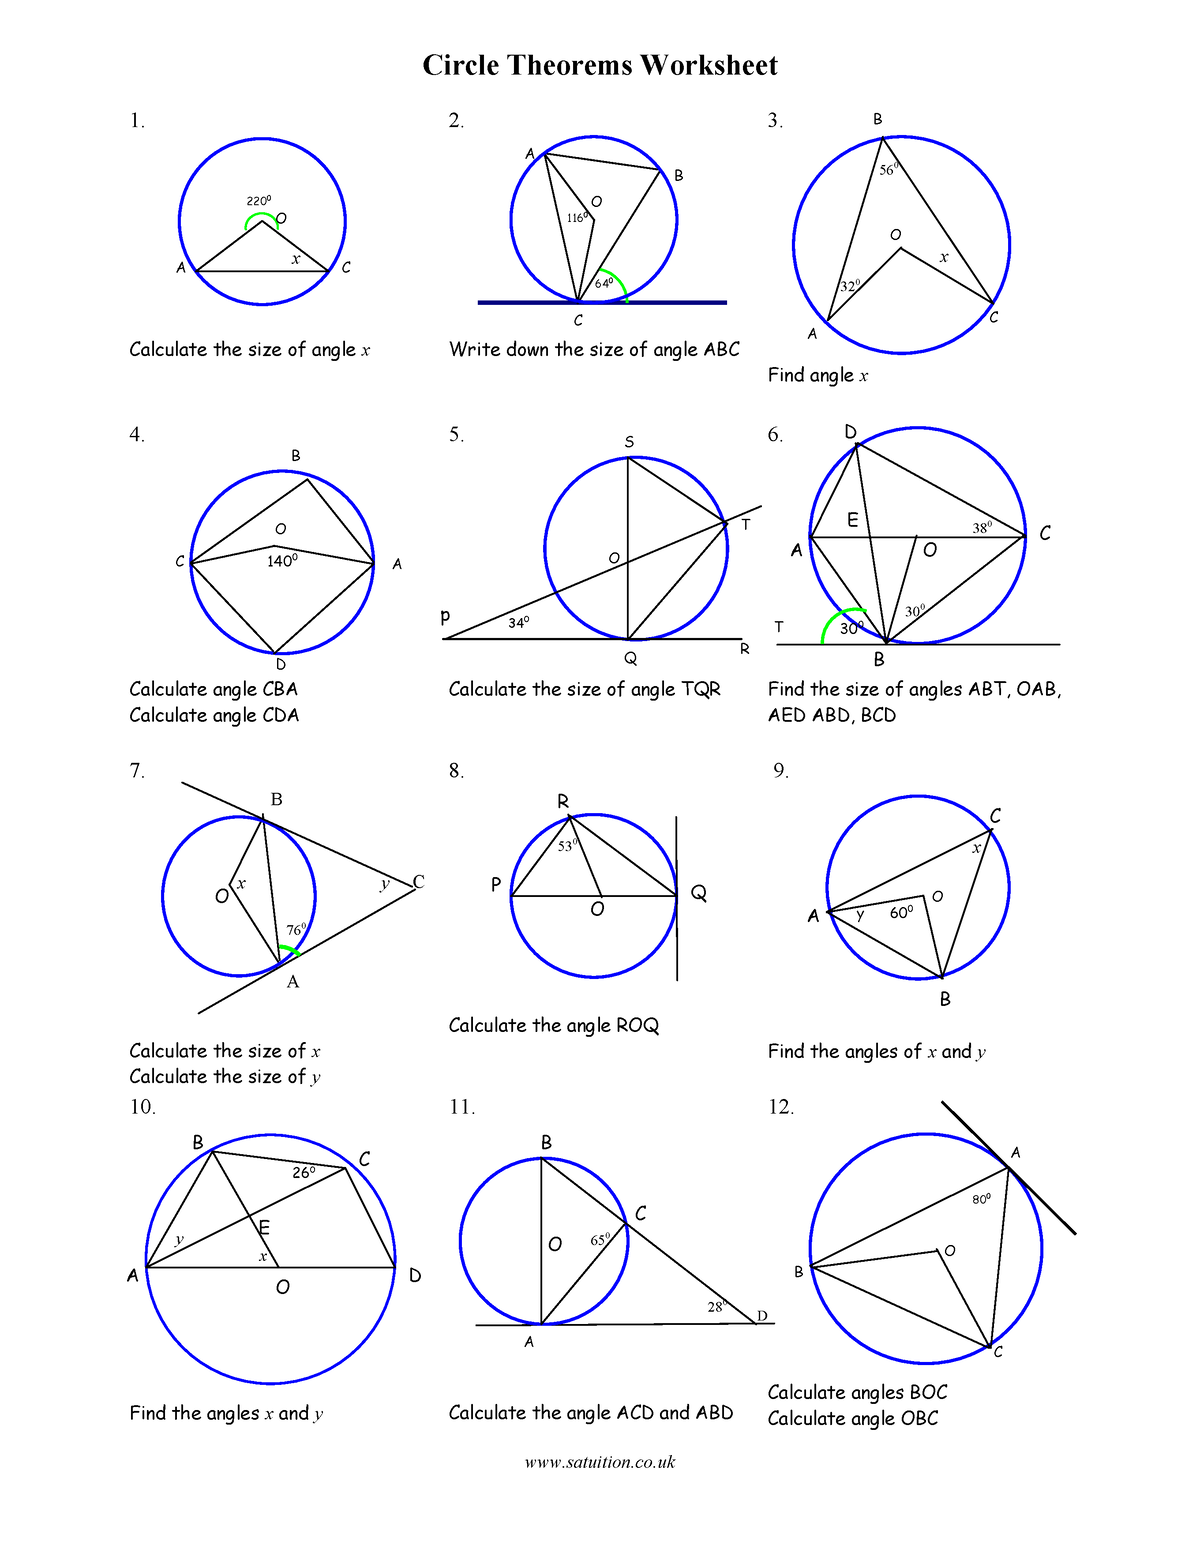 Circle Theorem Tangennt Circle Theorems Worksheet 1 Calculate The Size Of Angle X 2 Write